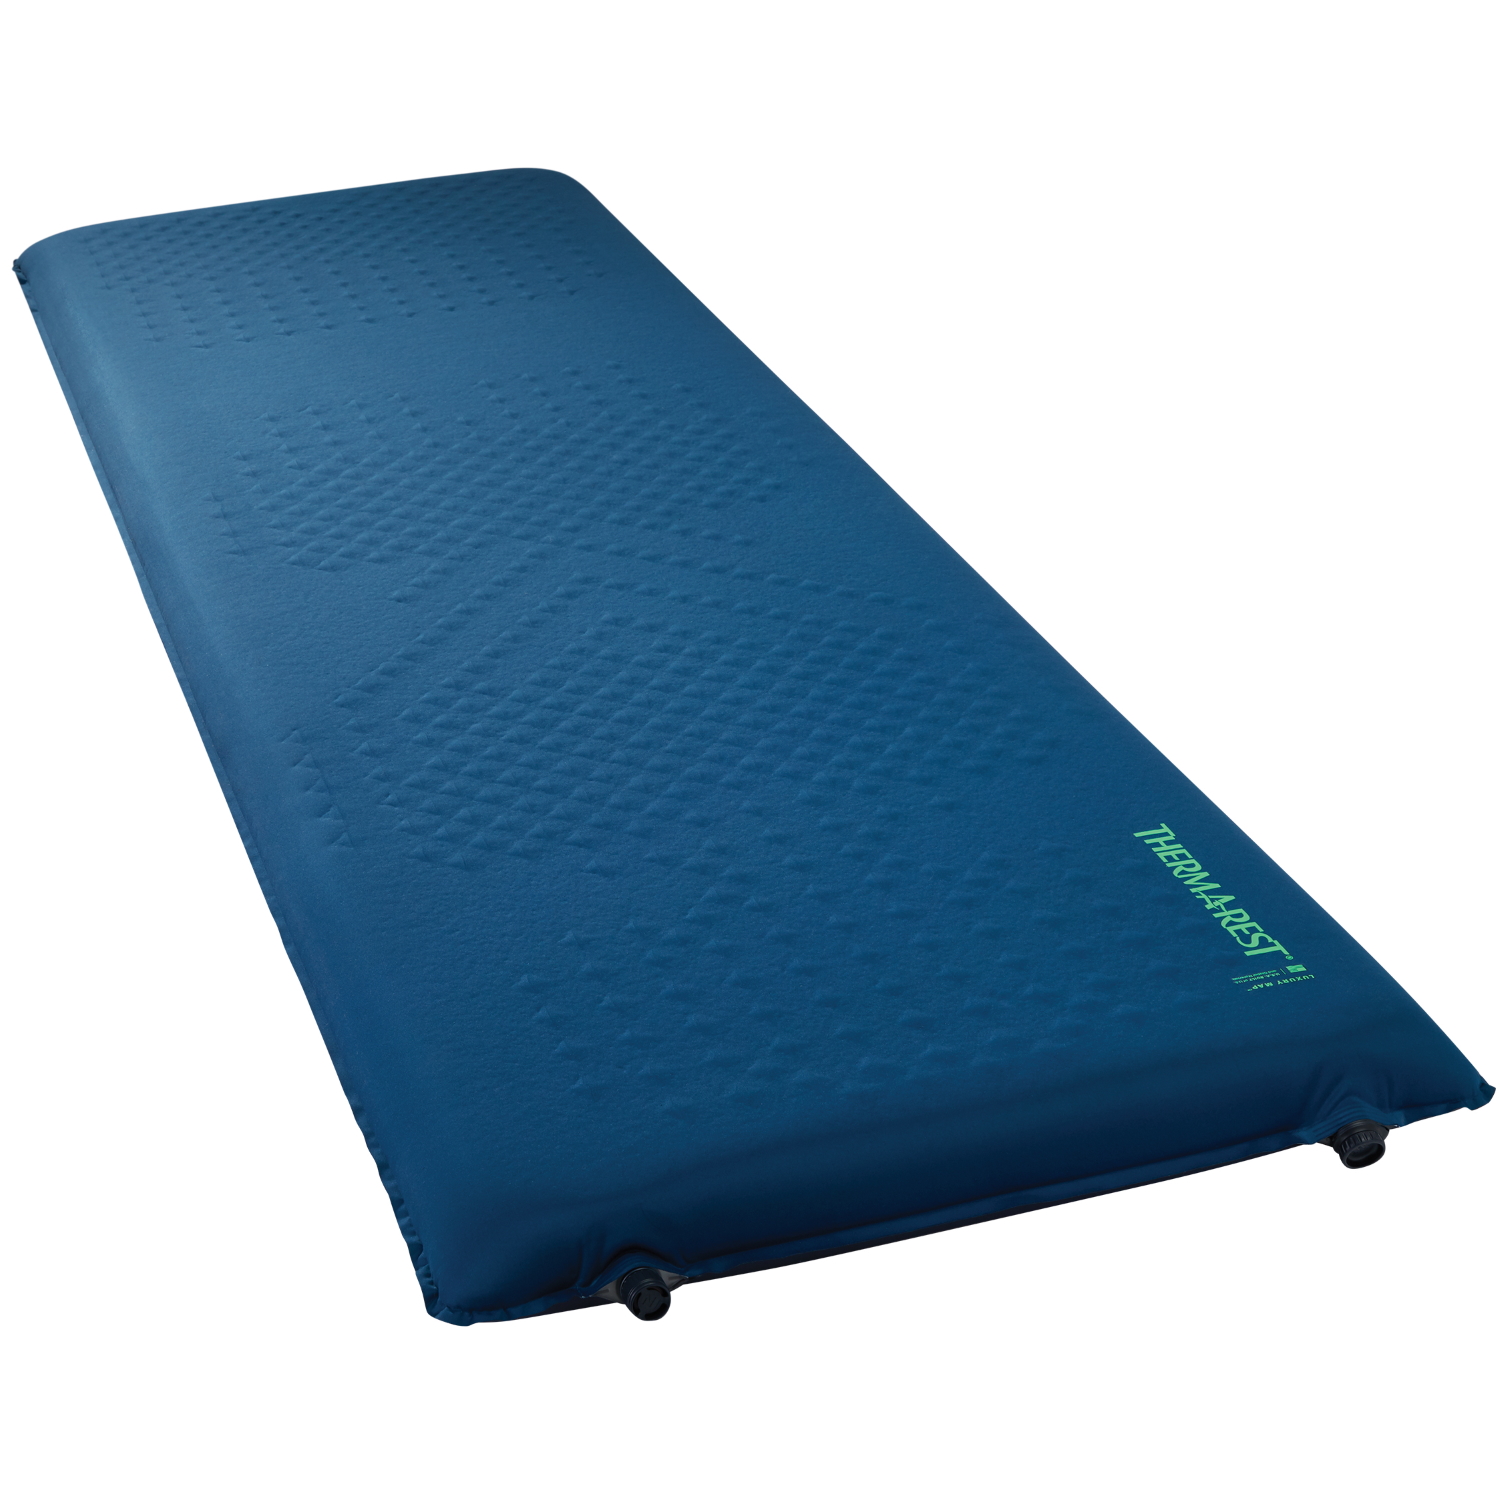 Picture of Therm-a-Rest Luxury Map Mattress Sleeping Pad - Large - Poseidon Blue